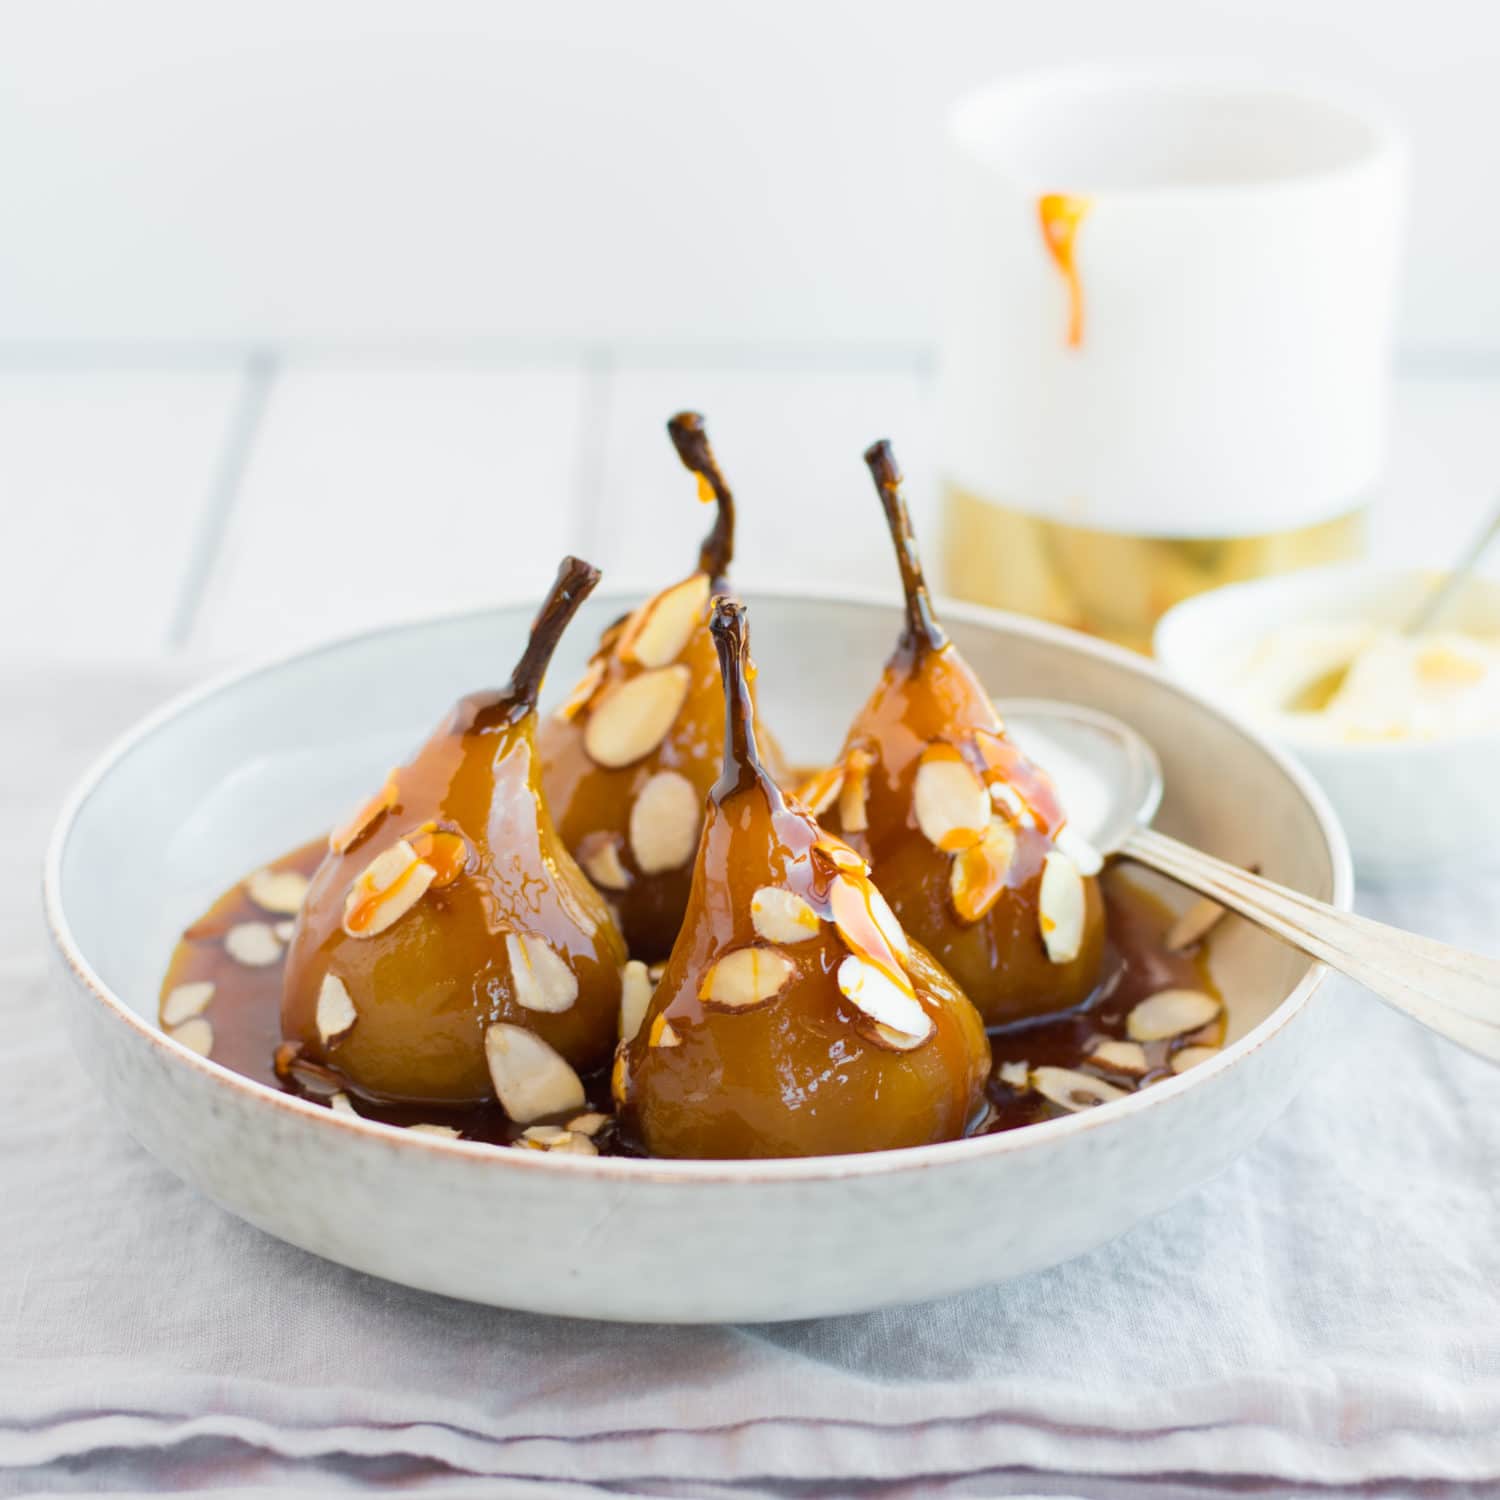 Salted caramel poached pears with yoghurt and almonds - Nadia Lim